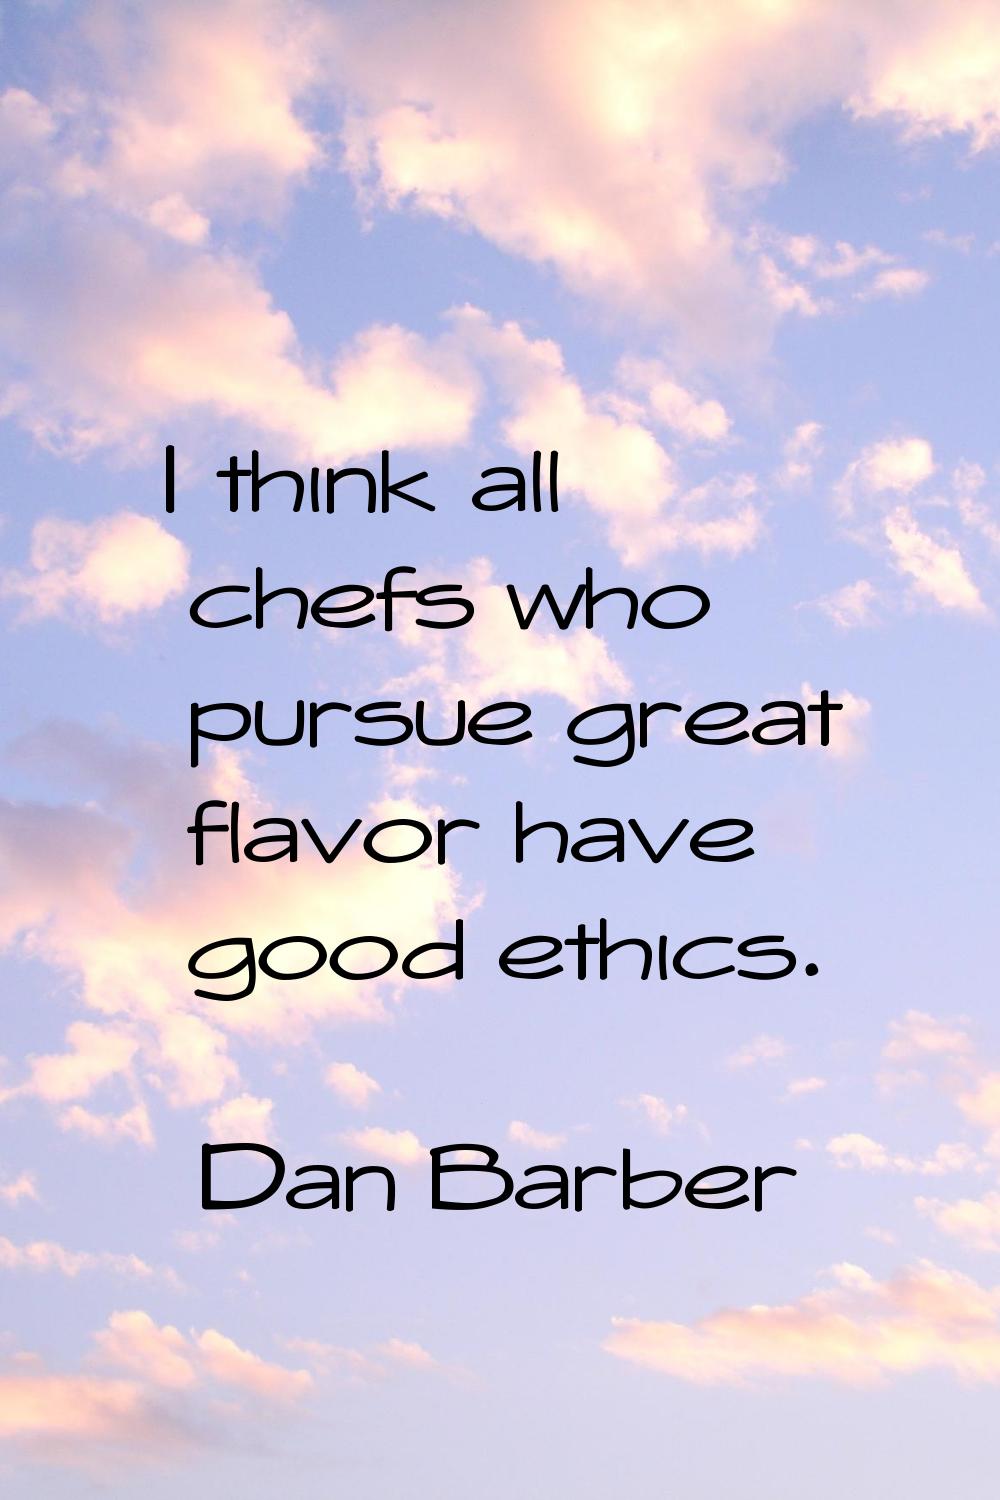 I think all chefs who pursue great flavor have good ethics.